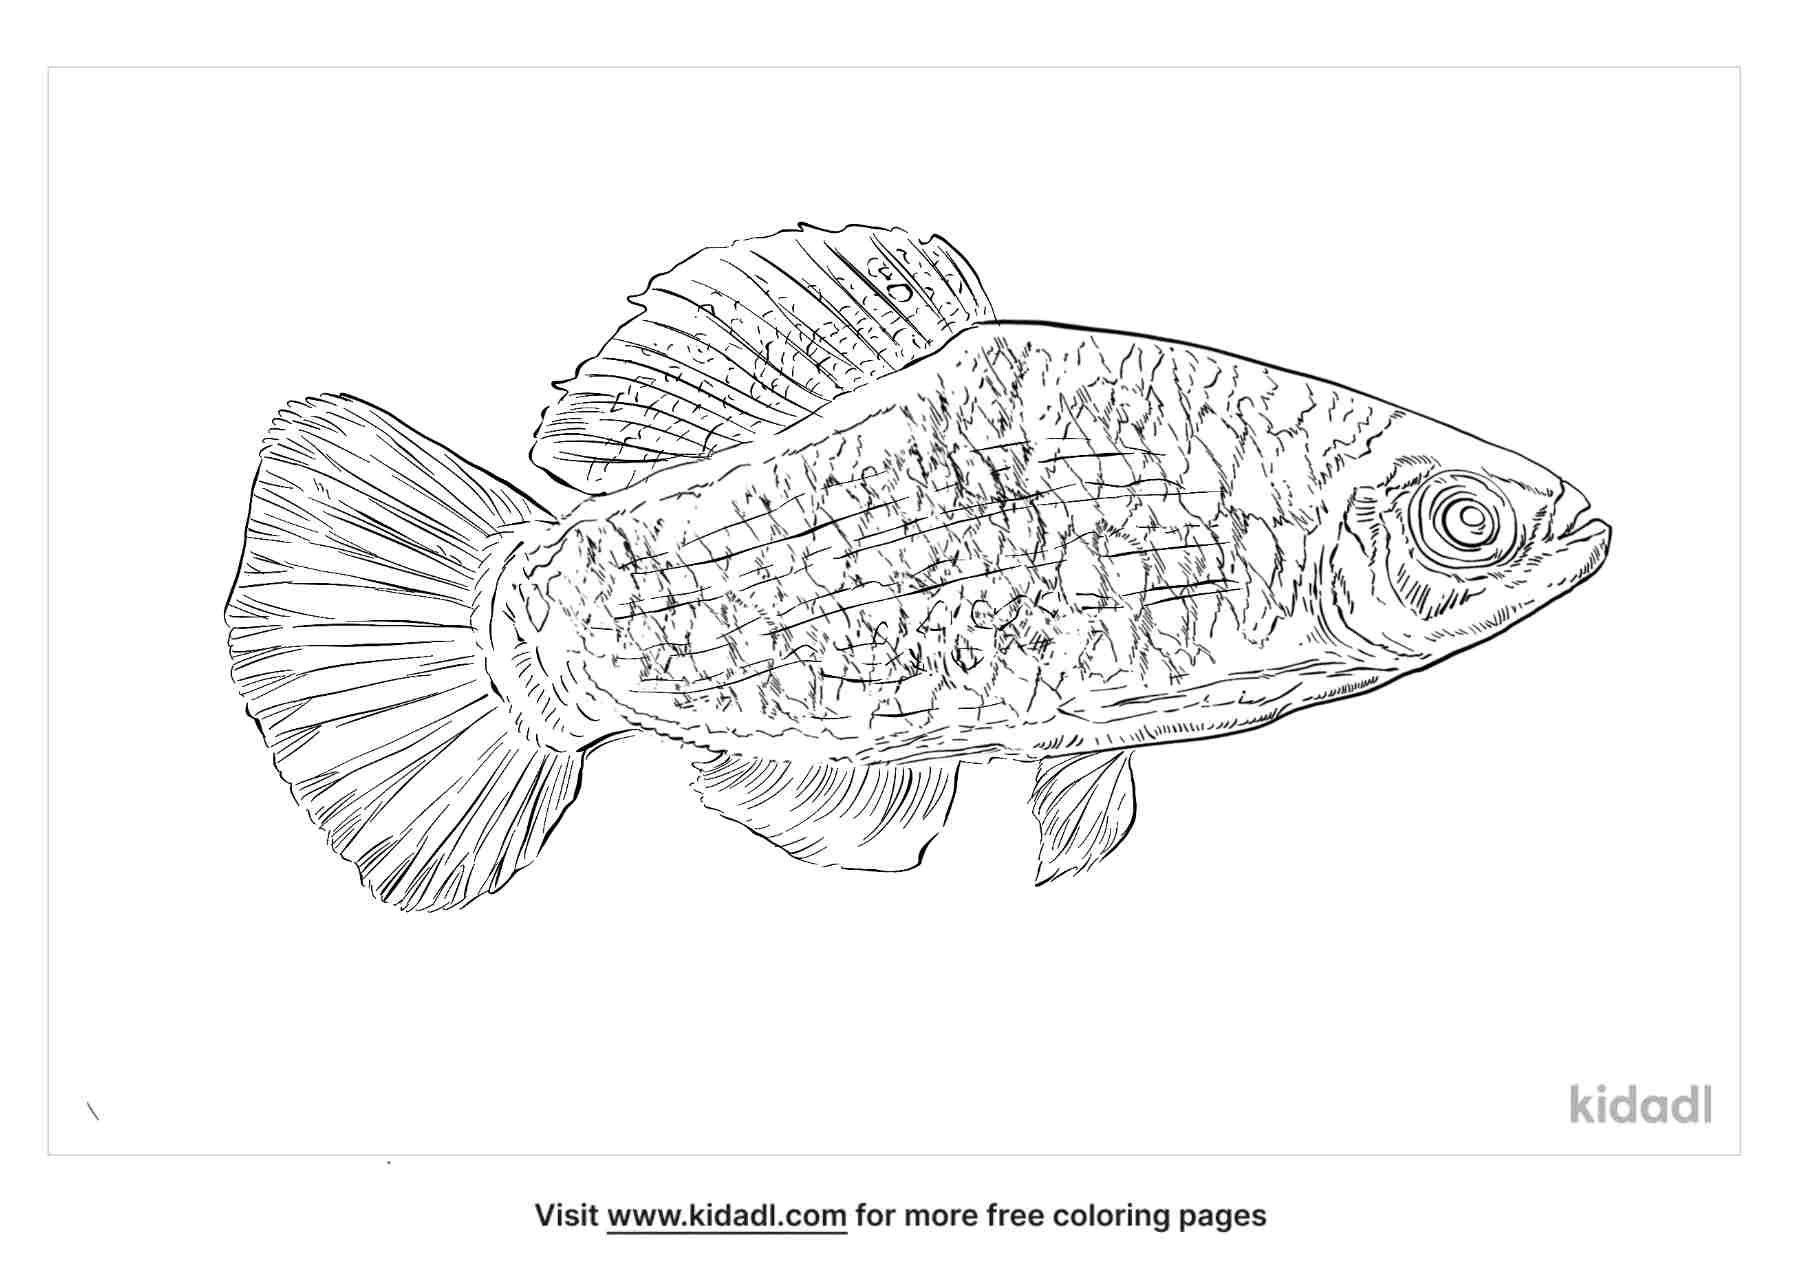 Flagfish coloring pages for kids.